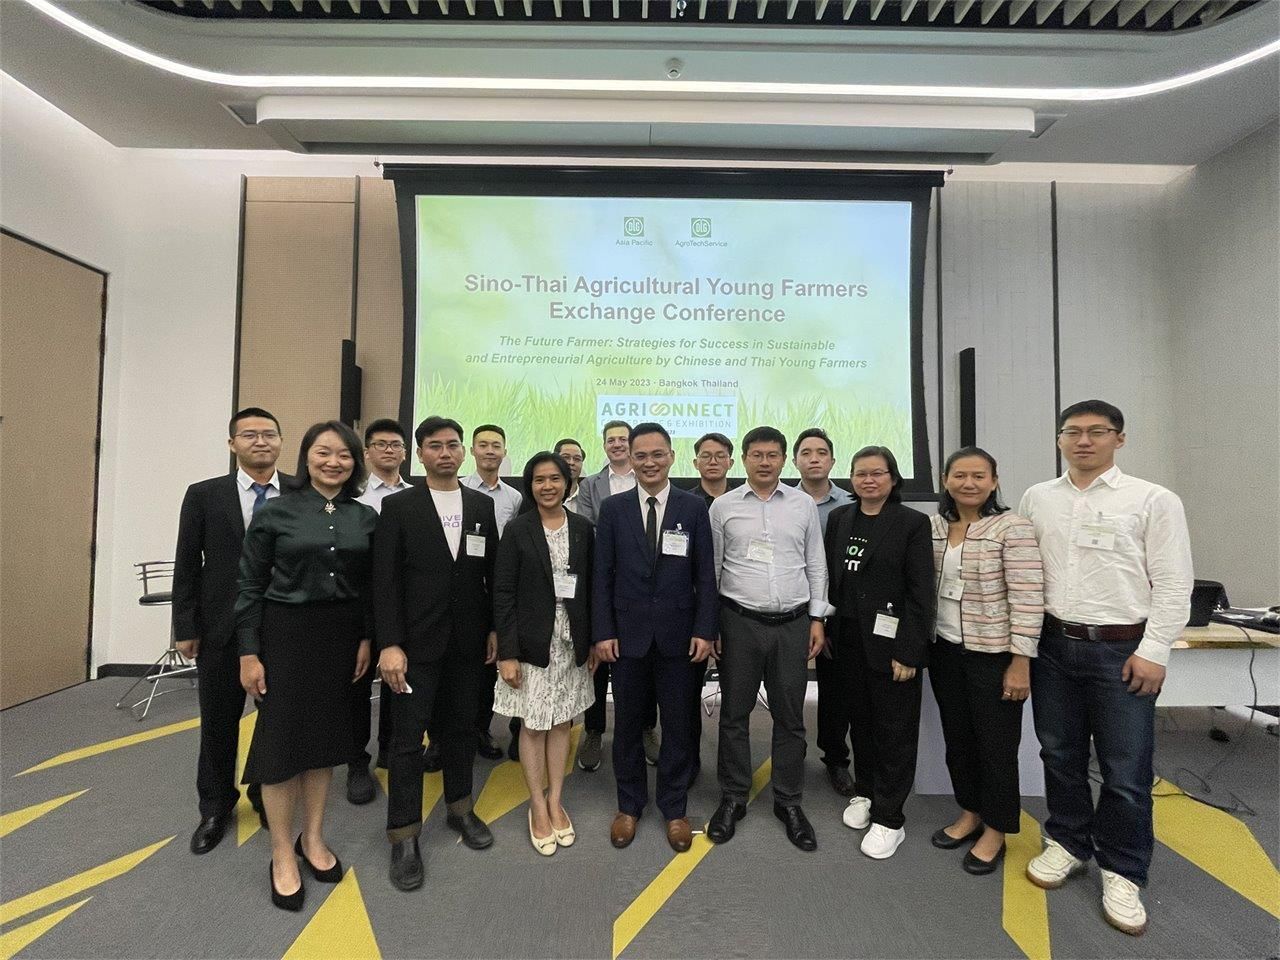 Sino-Thai Agricultural Young Farmers Exchange Conference